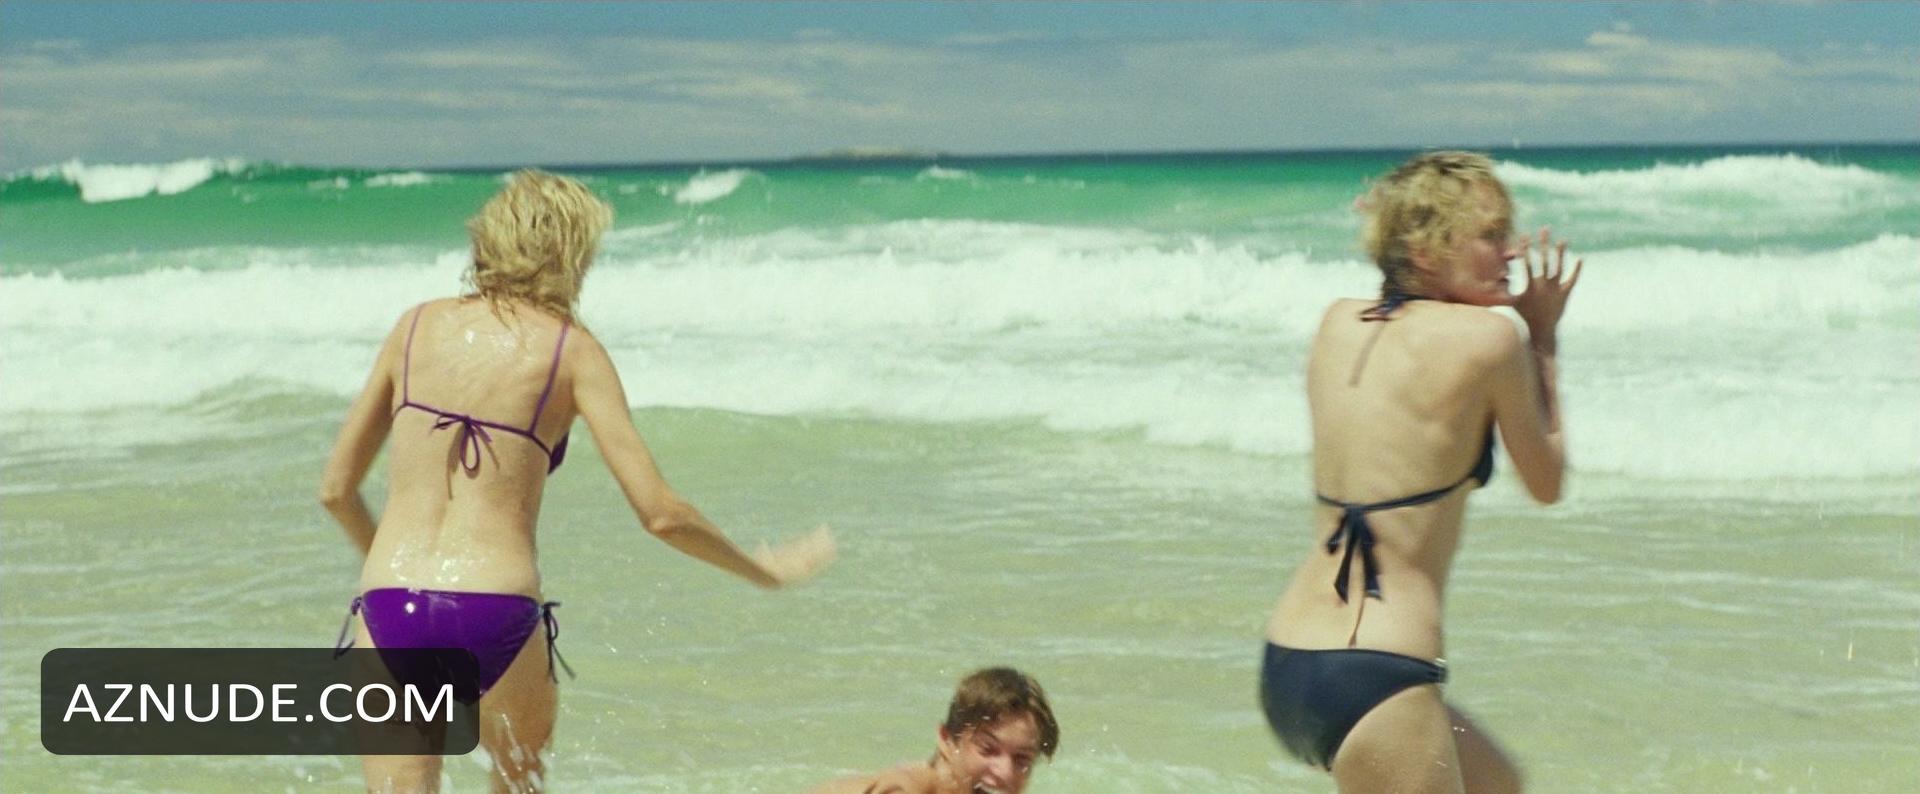 Browse Celebrity Beach Images Page 5 Aznude